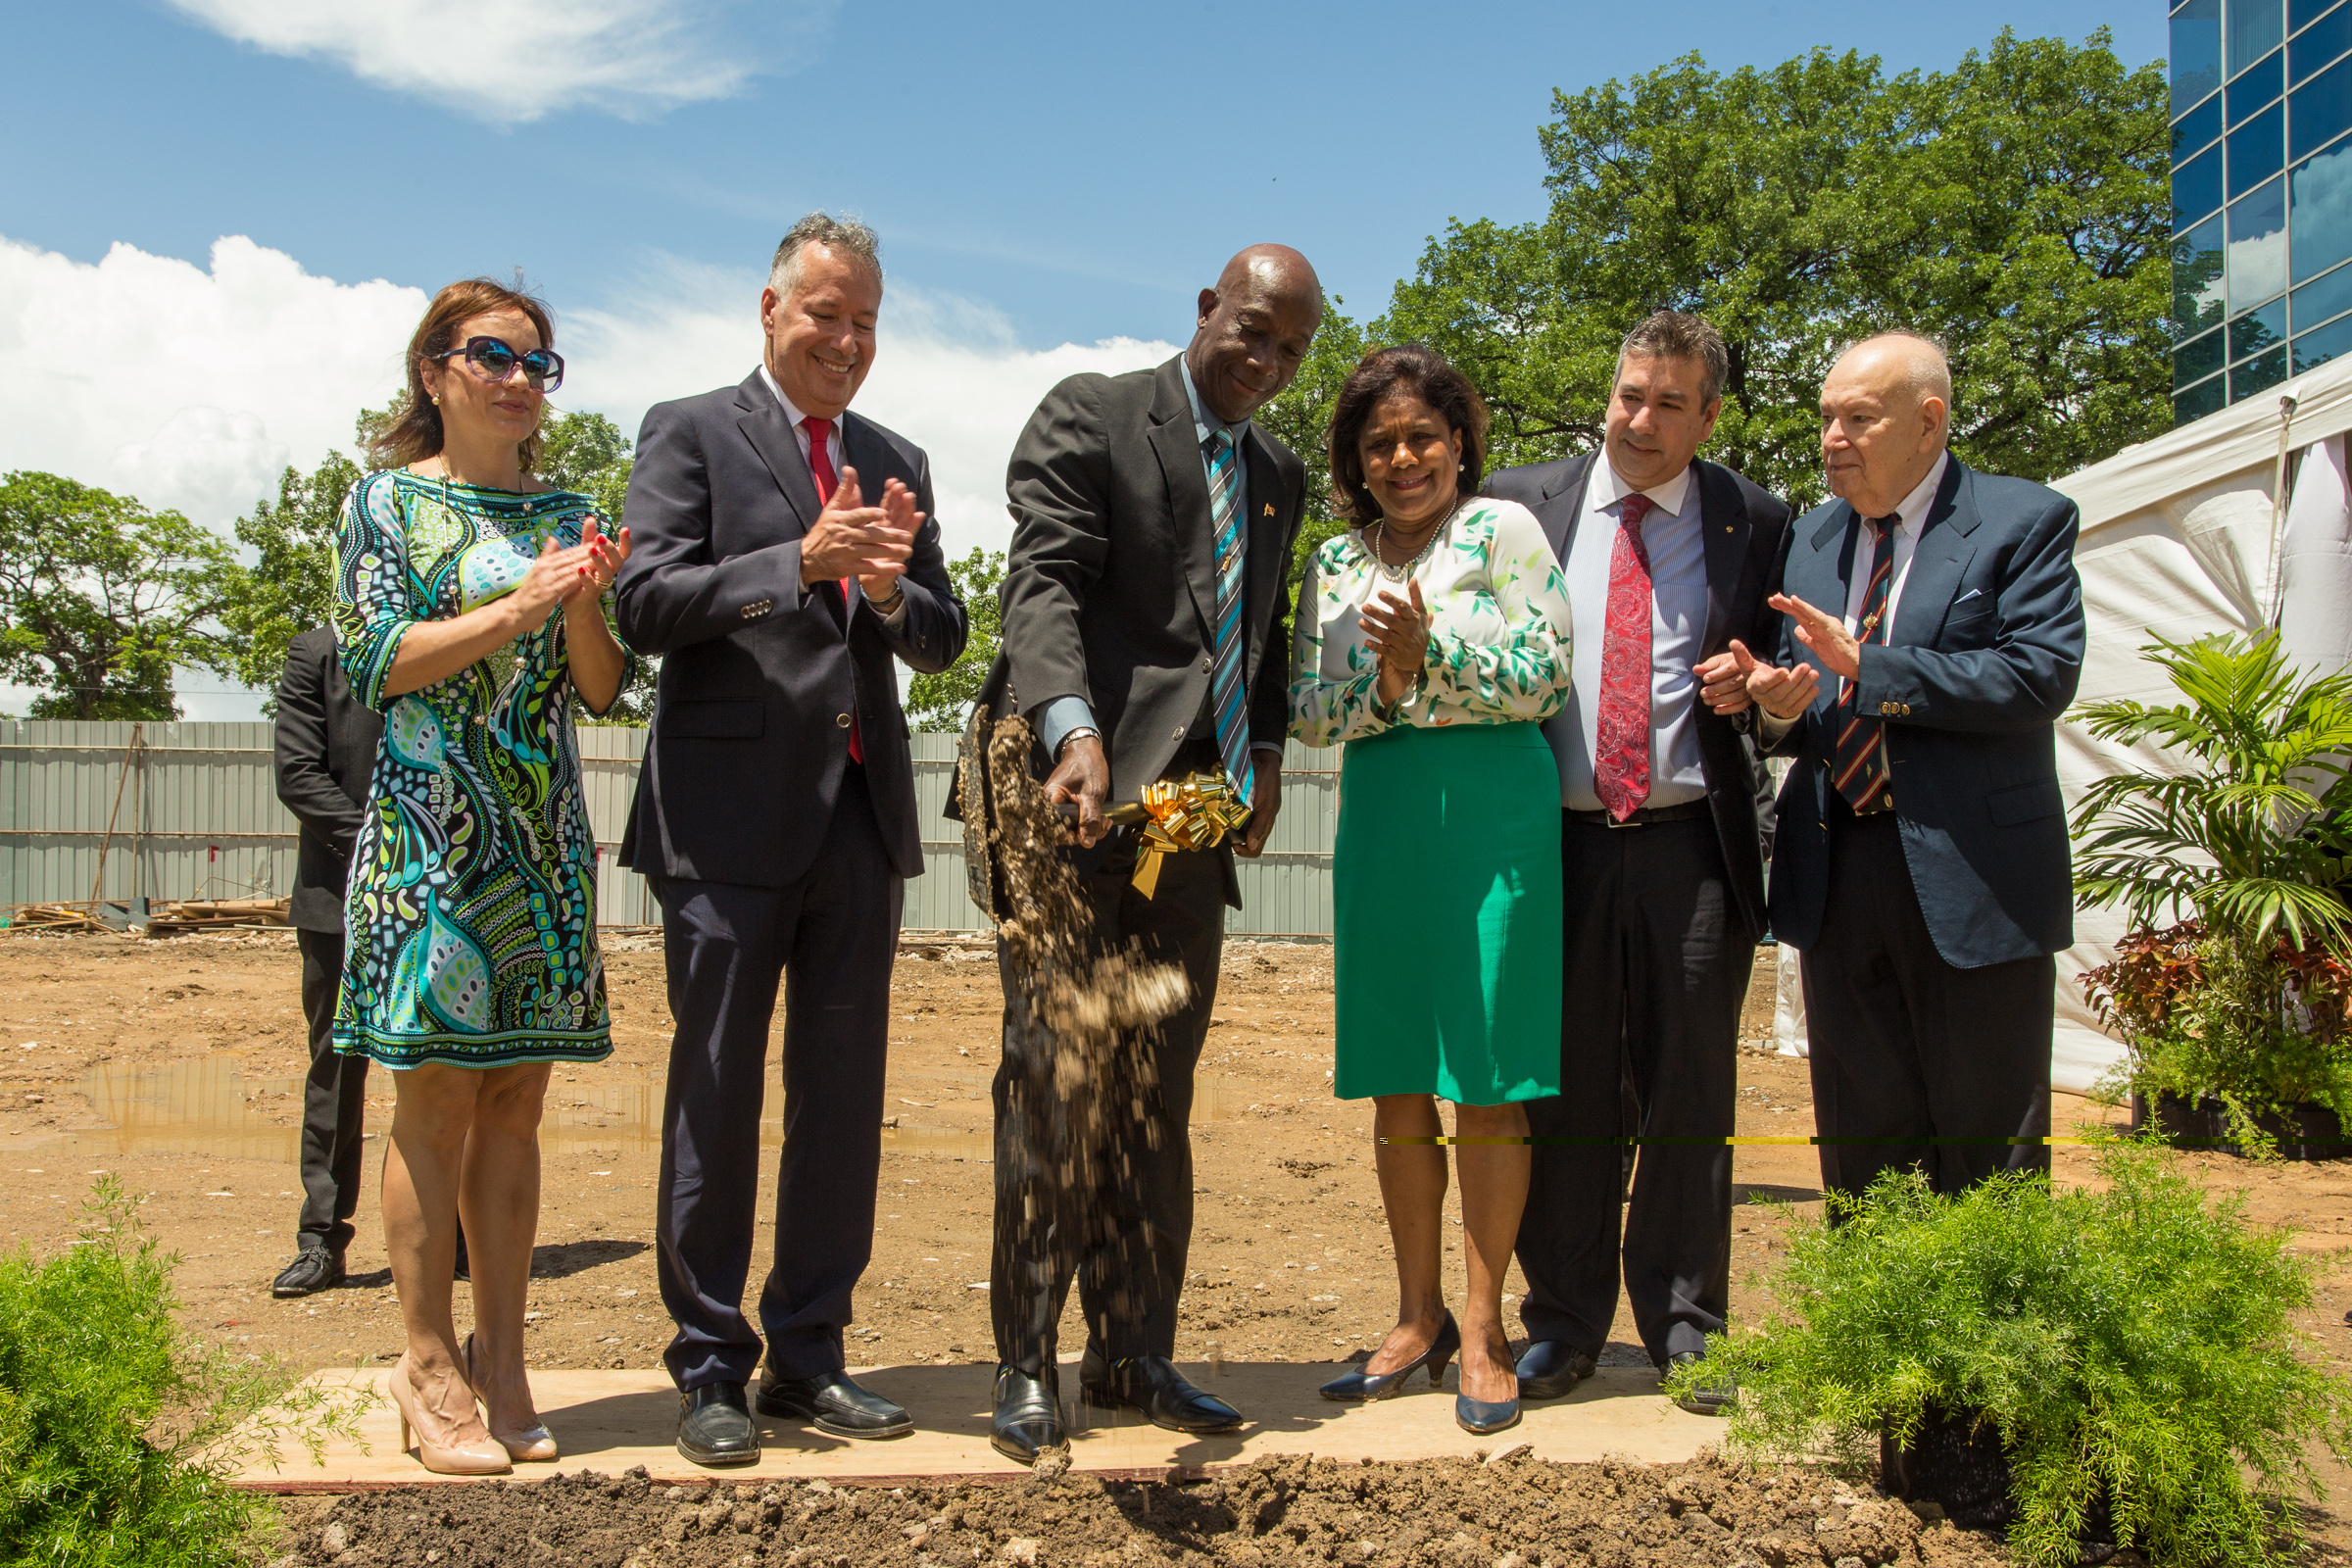 City Park Sod Turning / Grand Opening